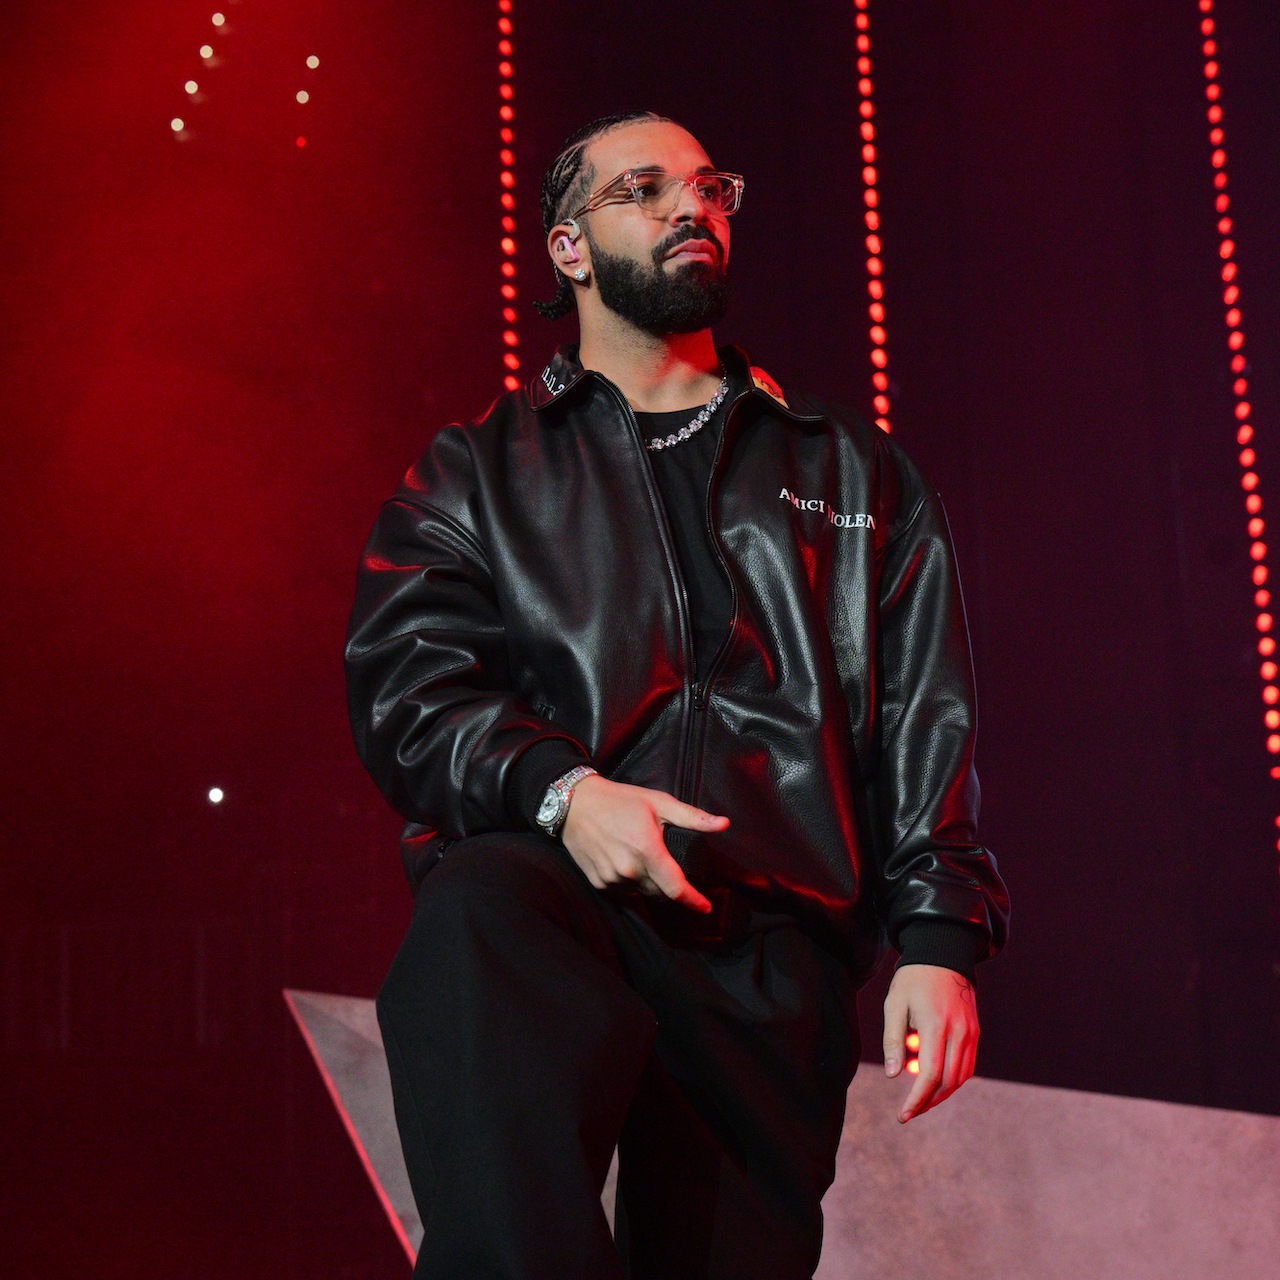 Drake Adds Additional Dates To ‘It’s All A Blur’ Tour With 21 Savage